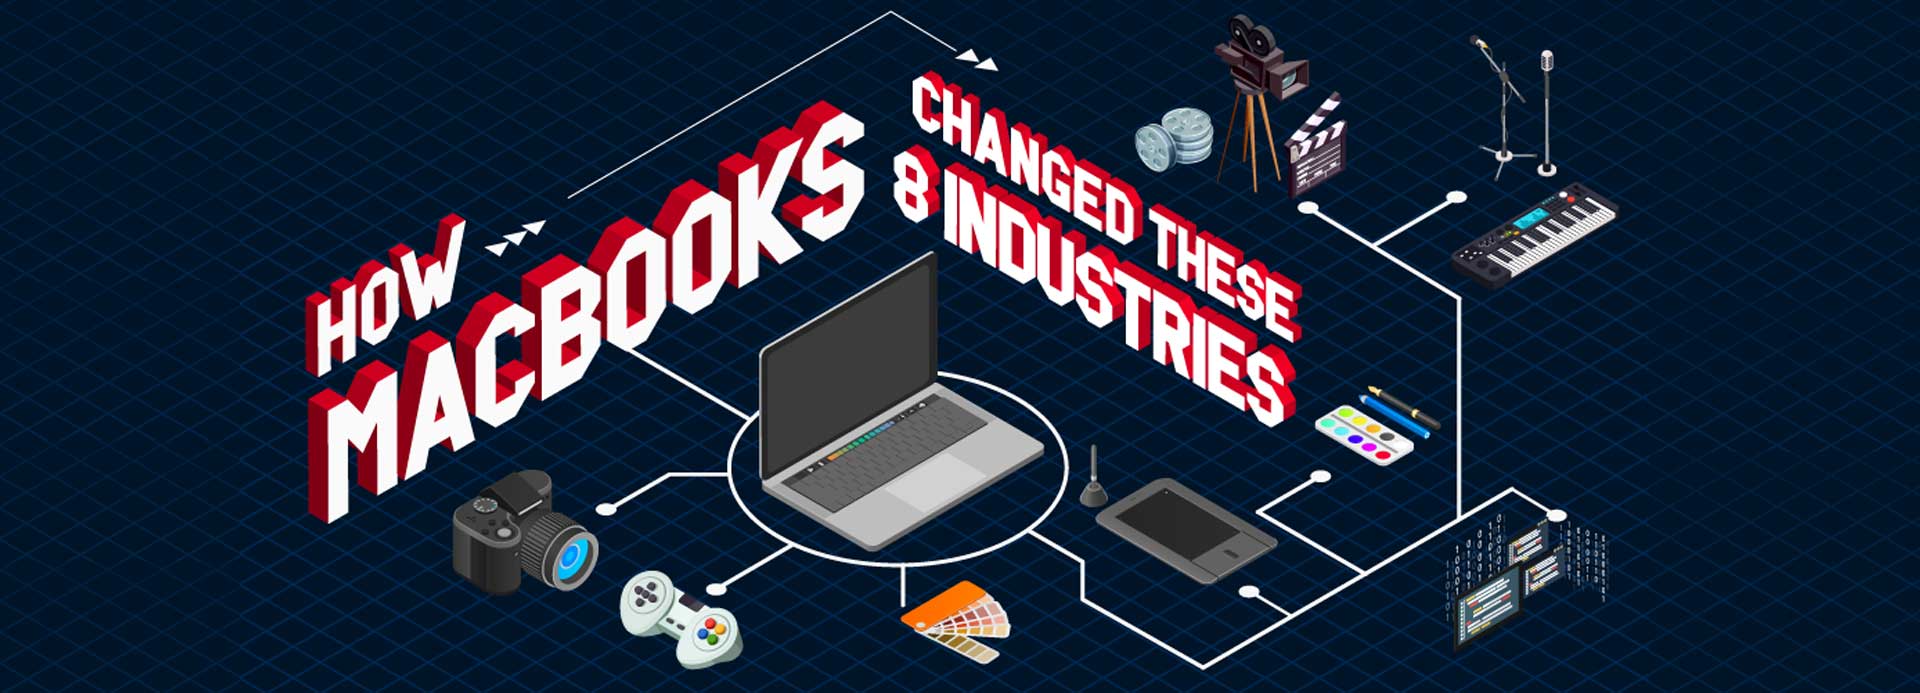 how Macbooks changed these-8 industries